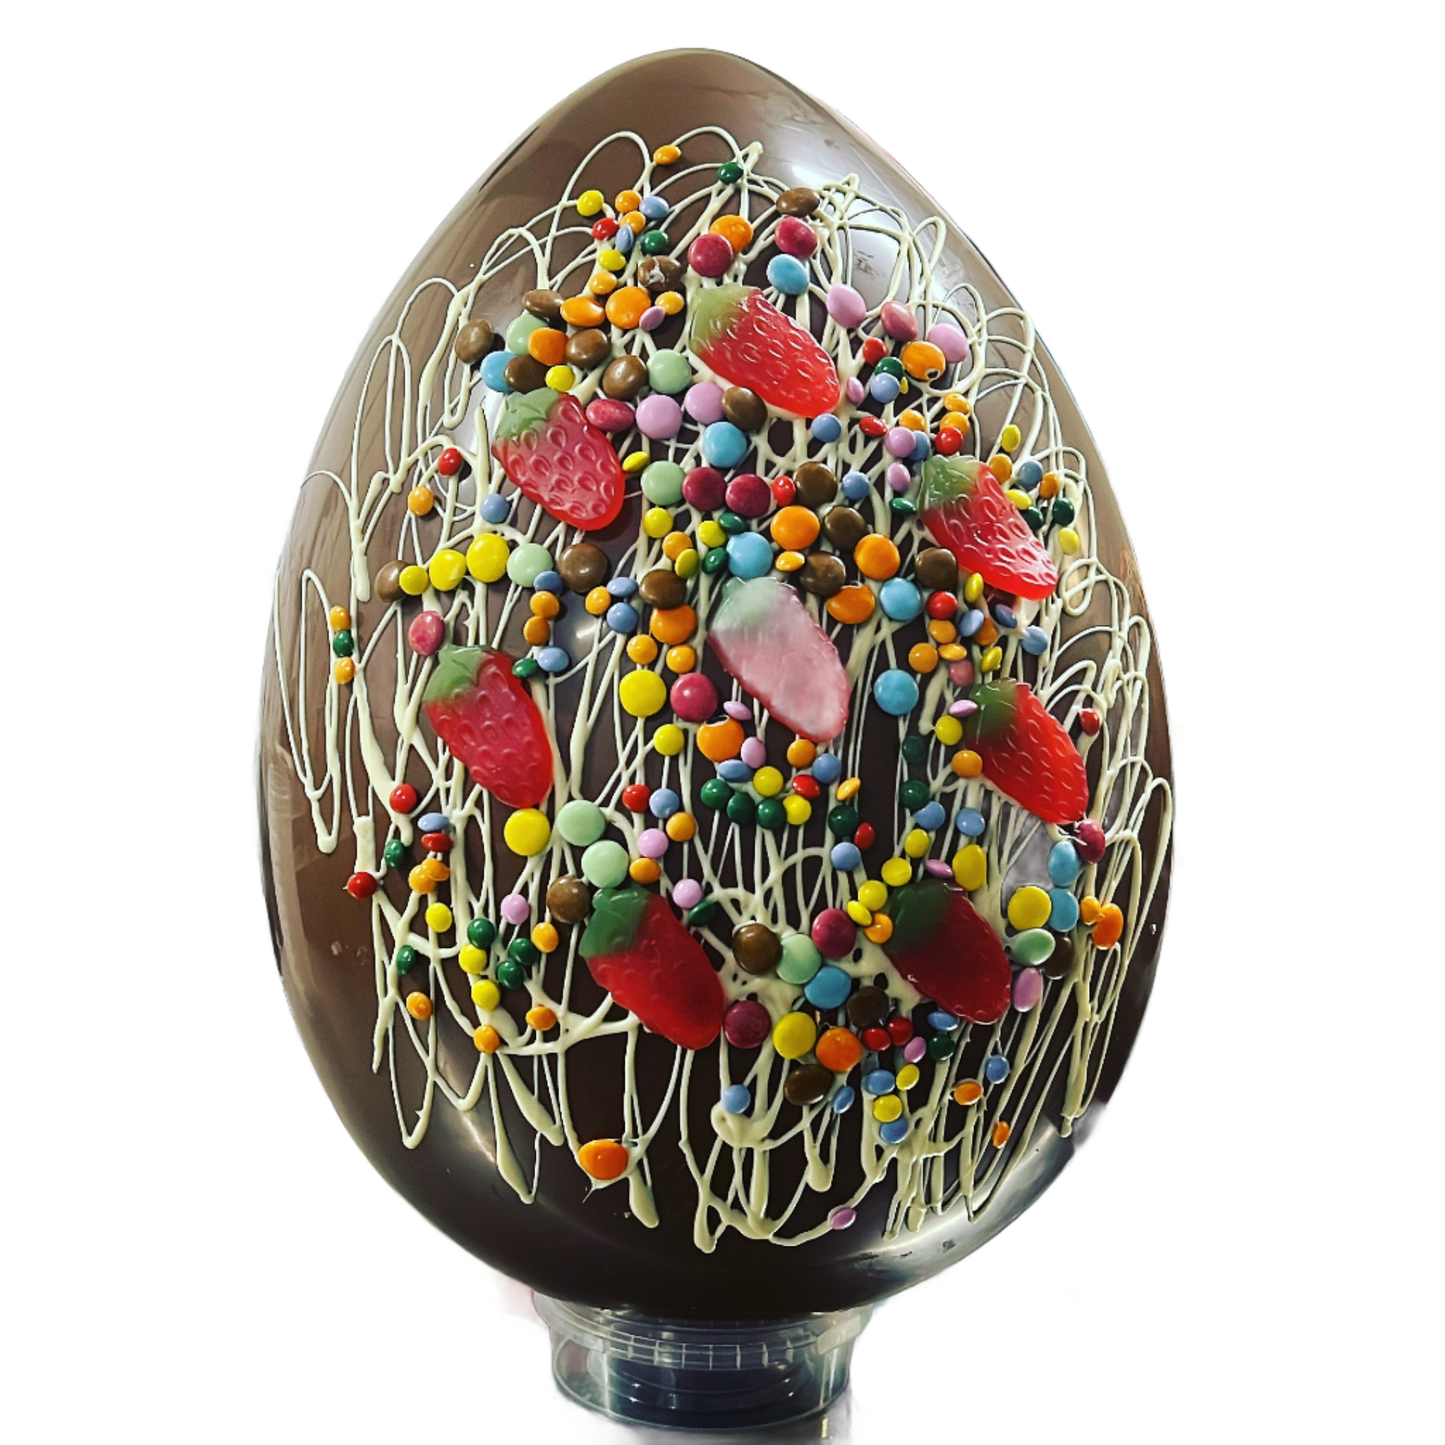 Giant Milk Chocolate Sweetie Egg, 5kg - 25 inches tall!